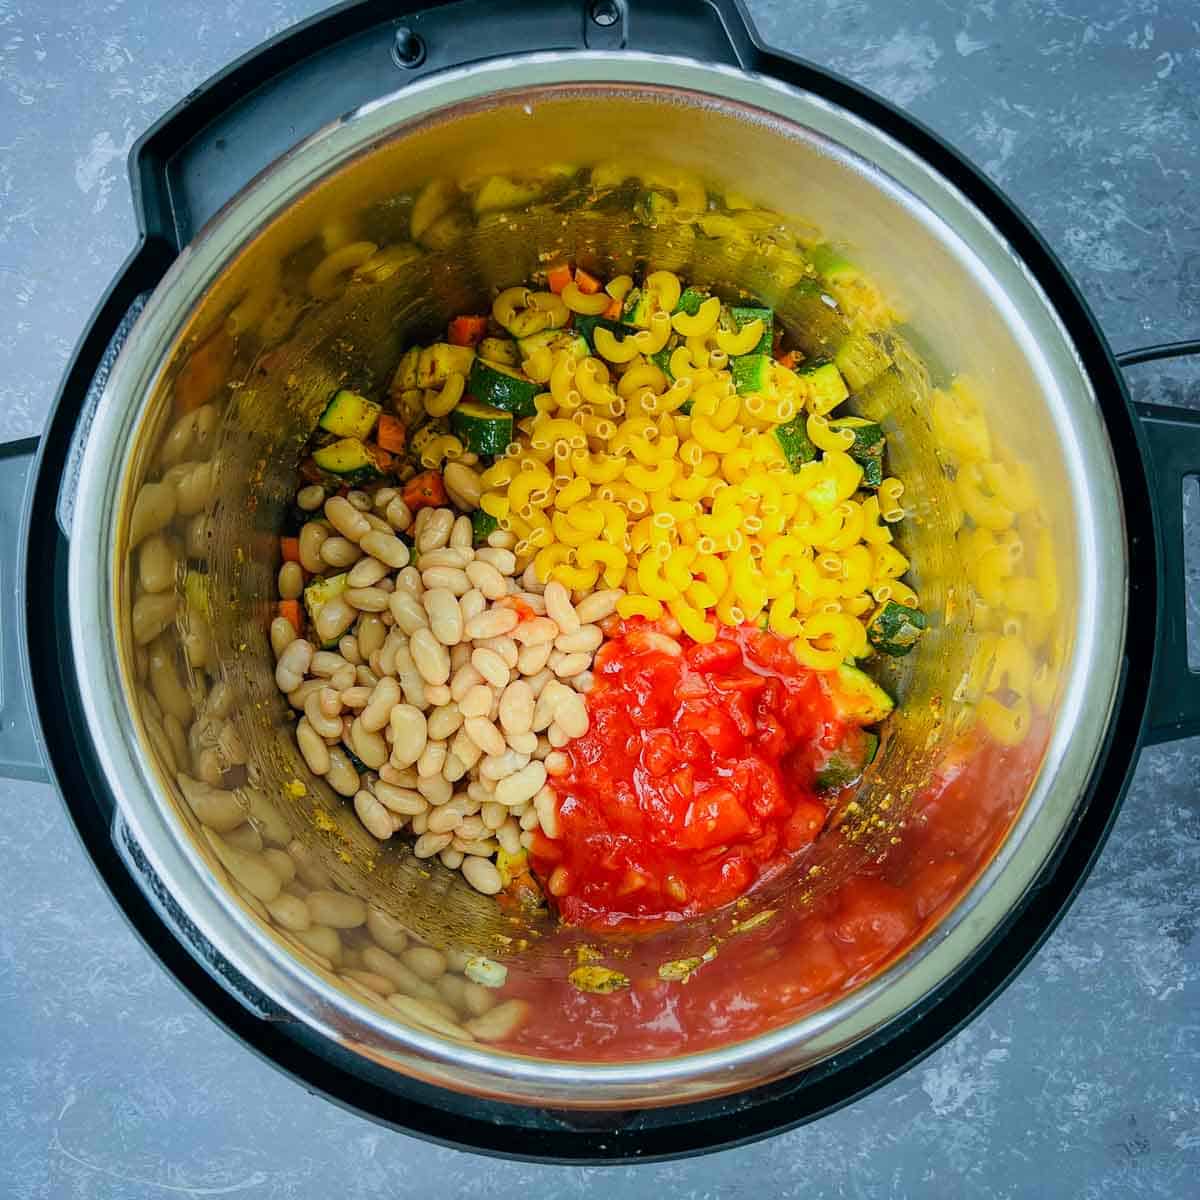 Beans, pasta, and tomatoes in the Instant Pot.